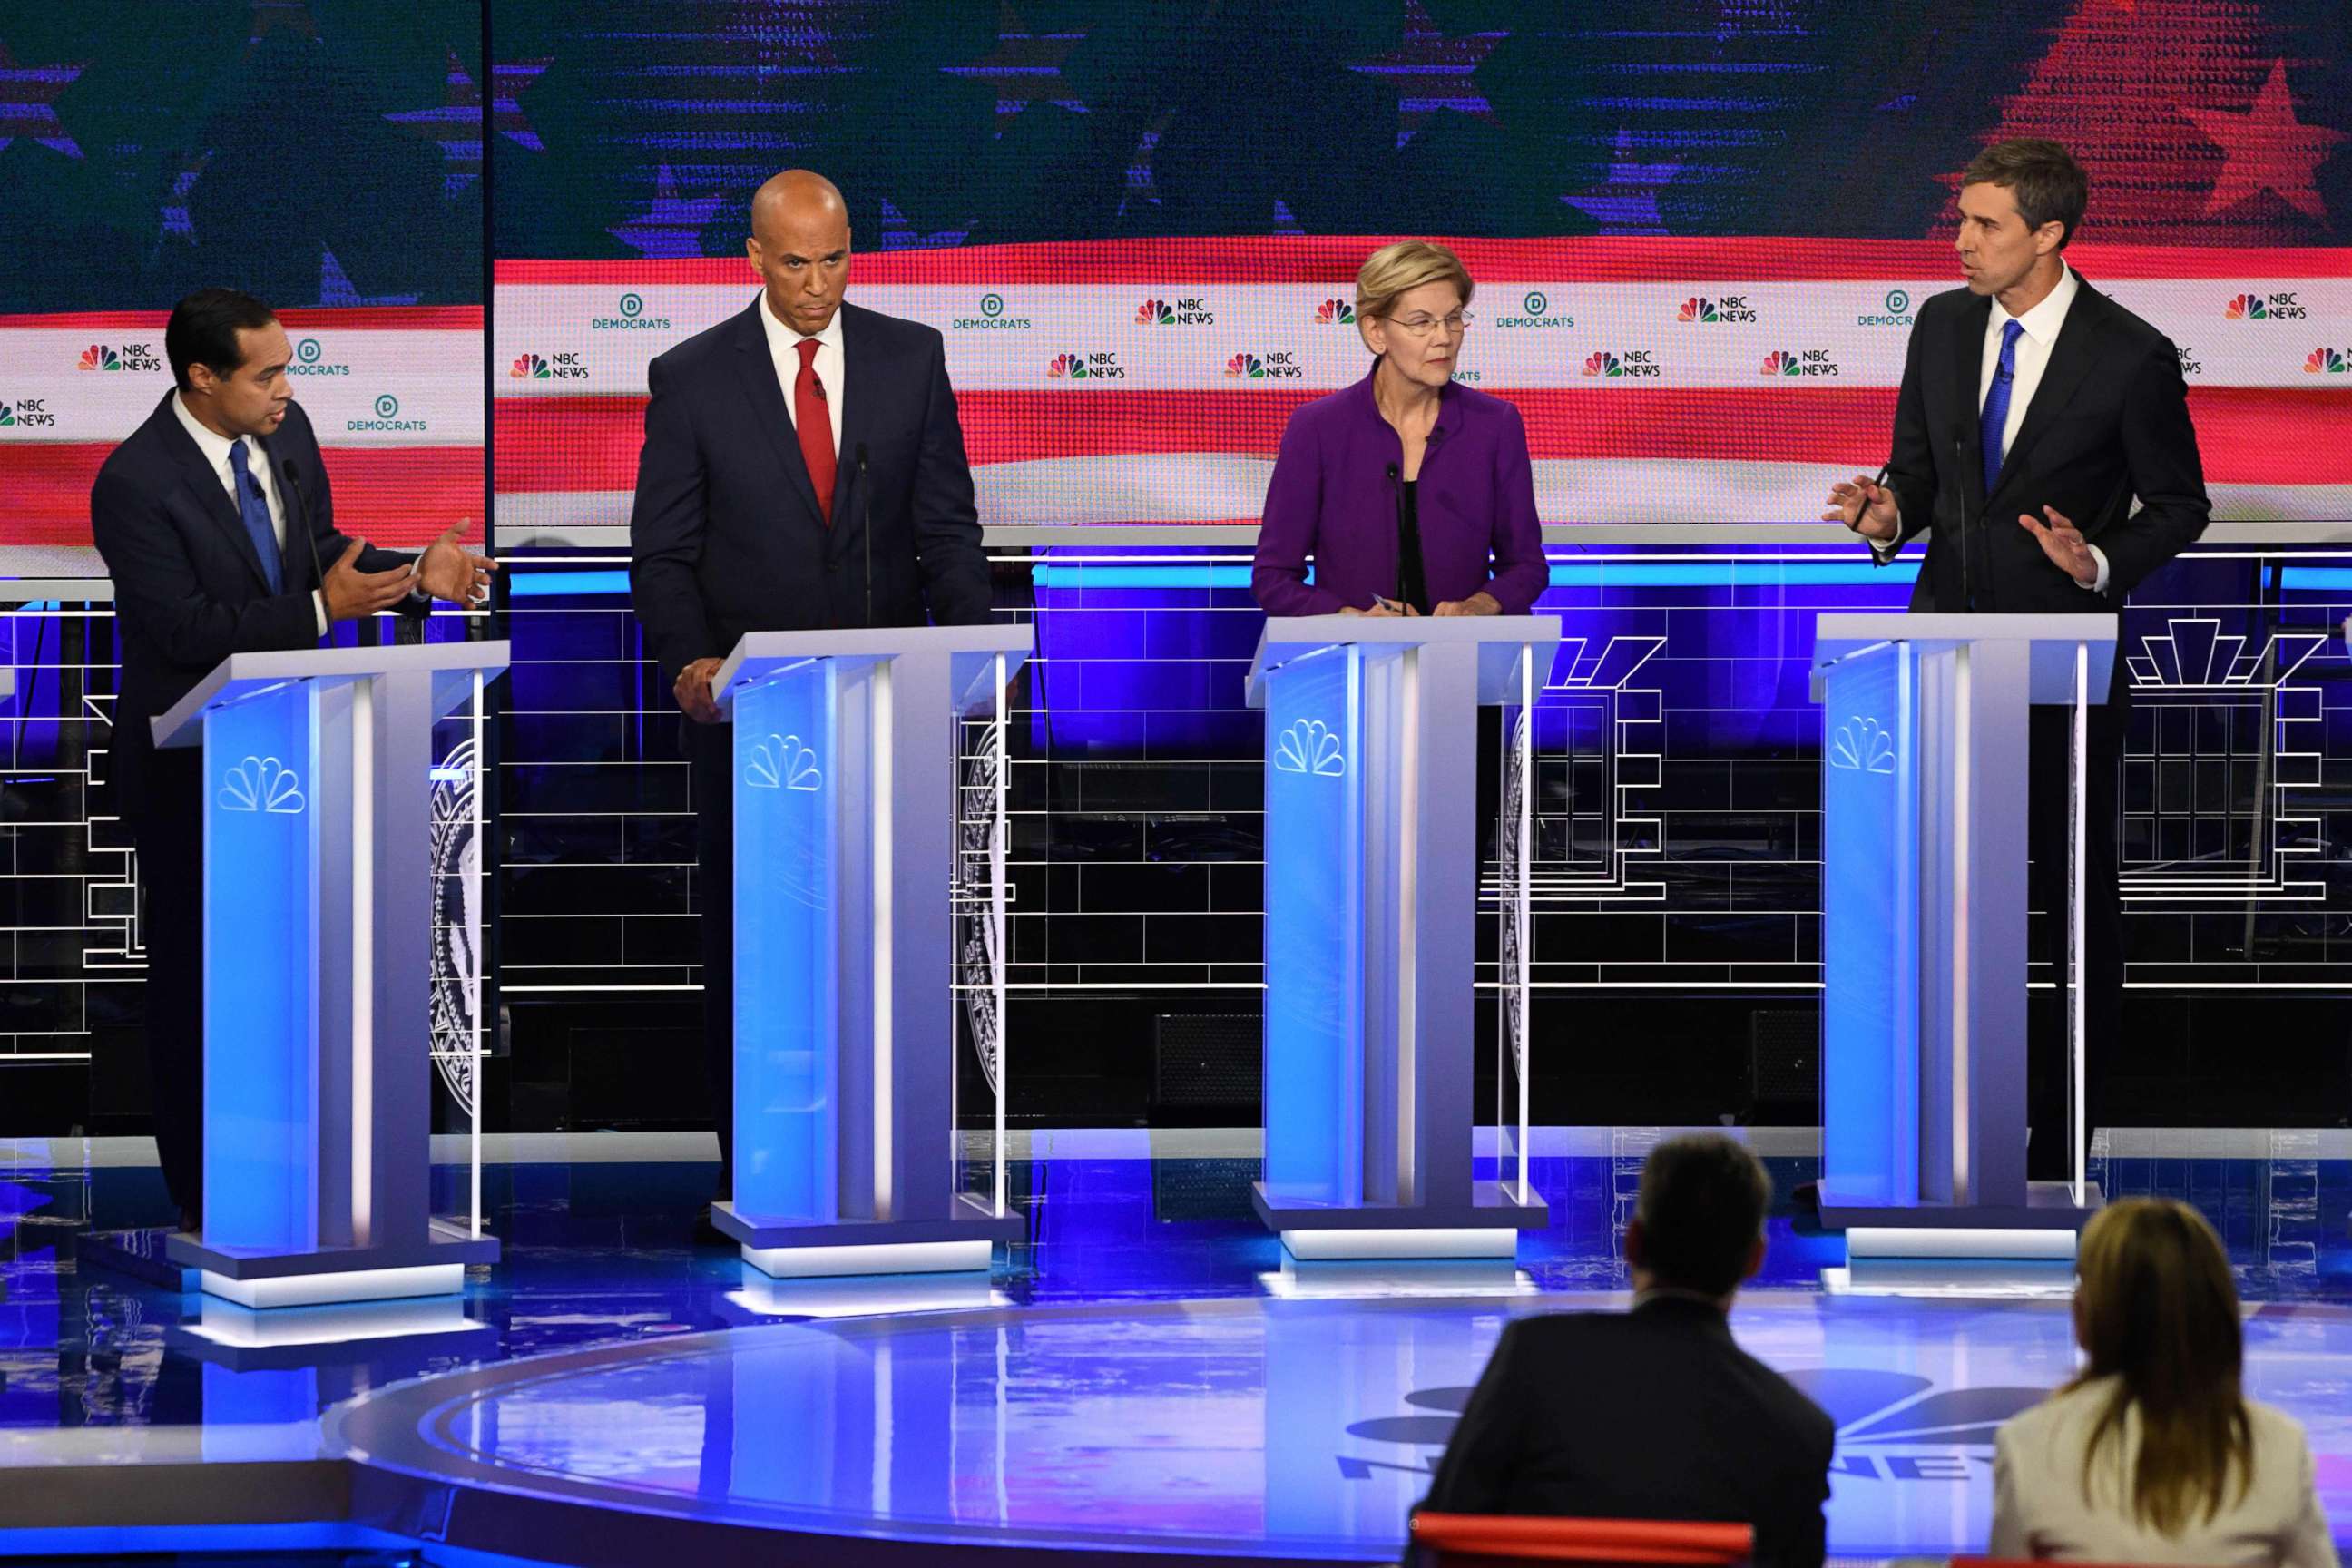 PHOTO: Julian Castro, Cory Booker, Elizabeth Warren and Beto O'Rourke participate in the first Democratic primary debate hosted by NBC News at the Adrienne Arsht Center for the Performing Arts in Miami, Florida, June 26, 2019.